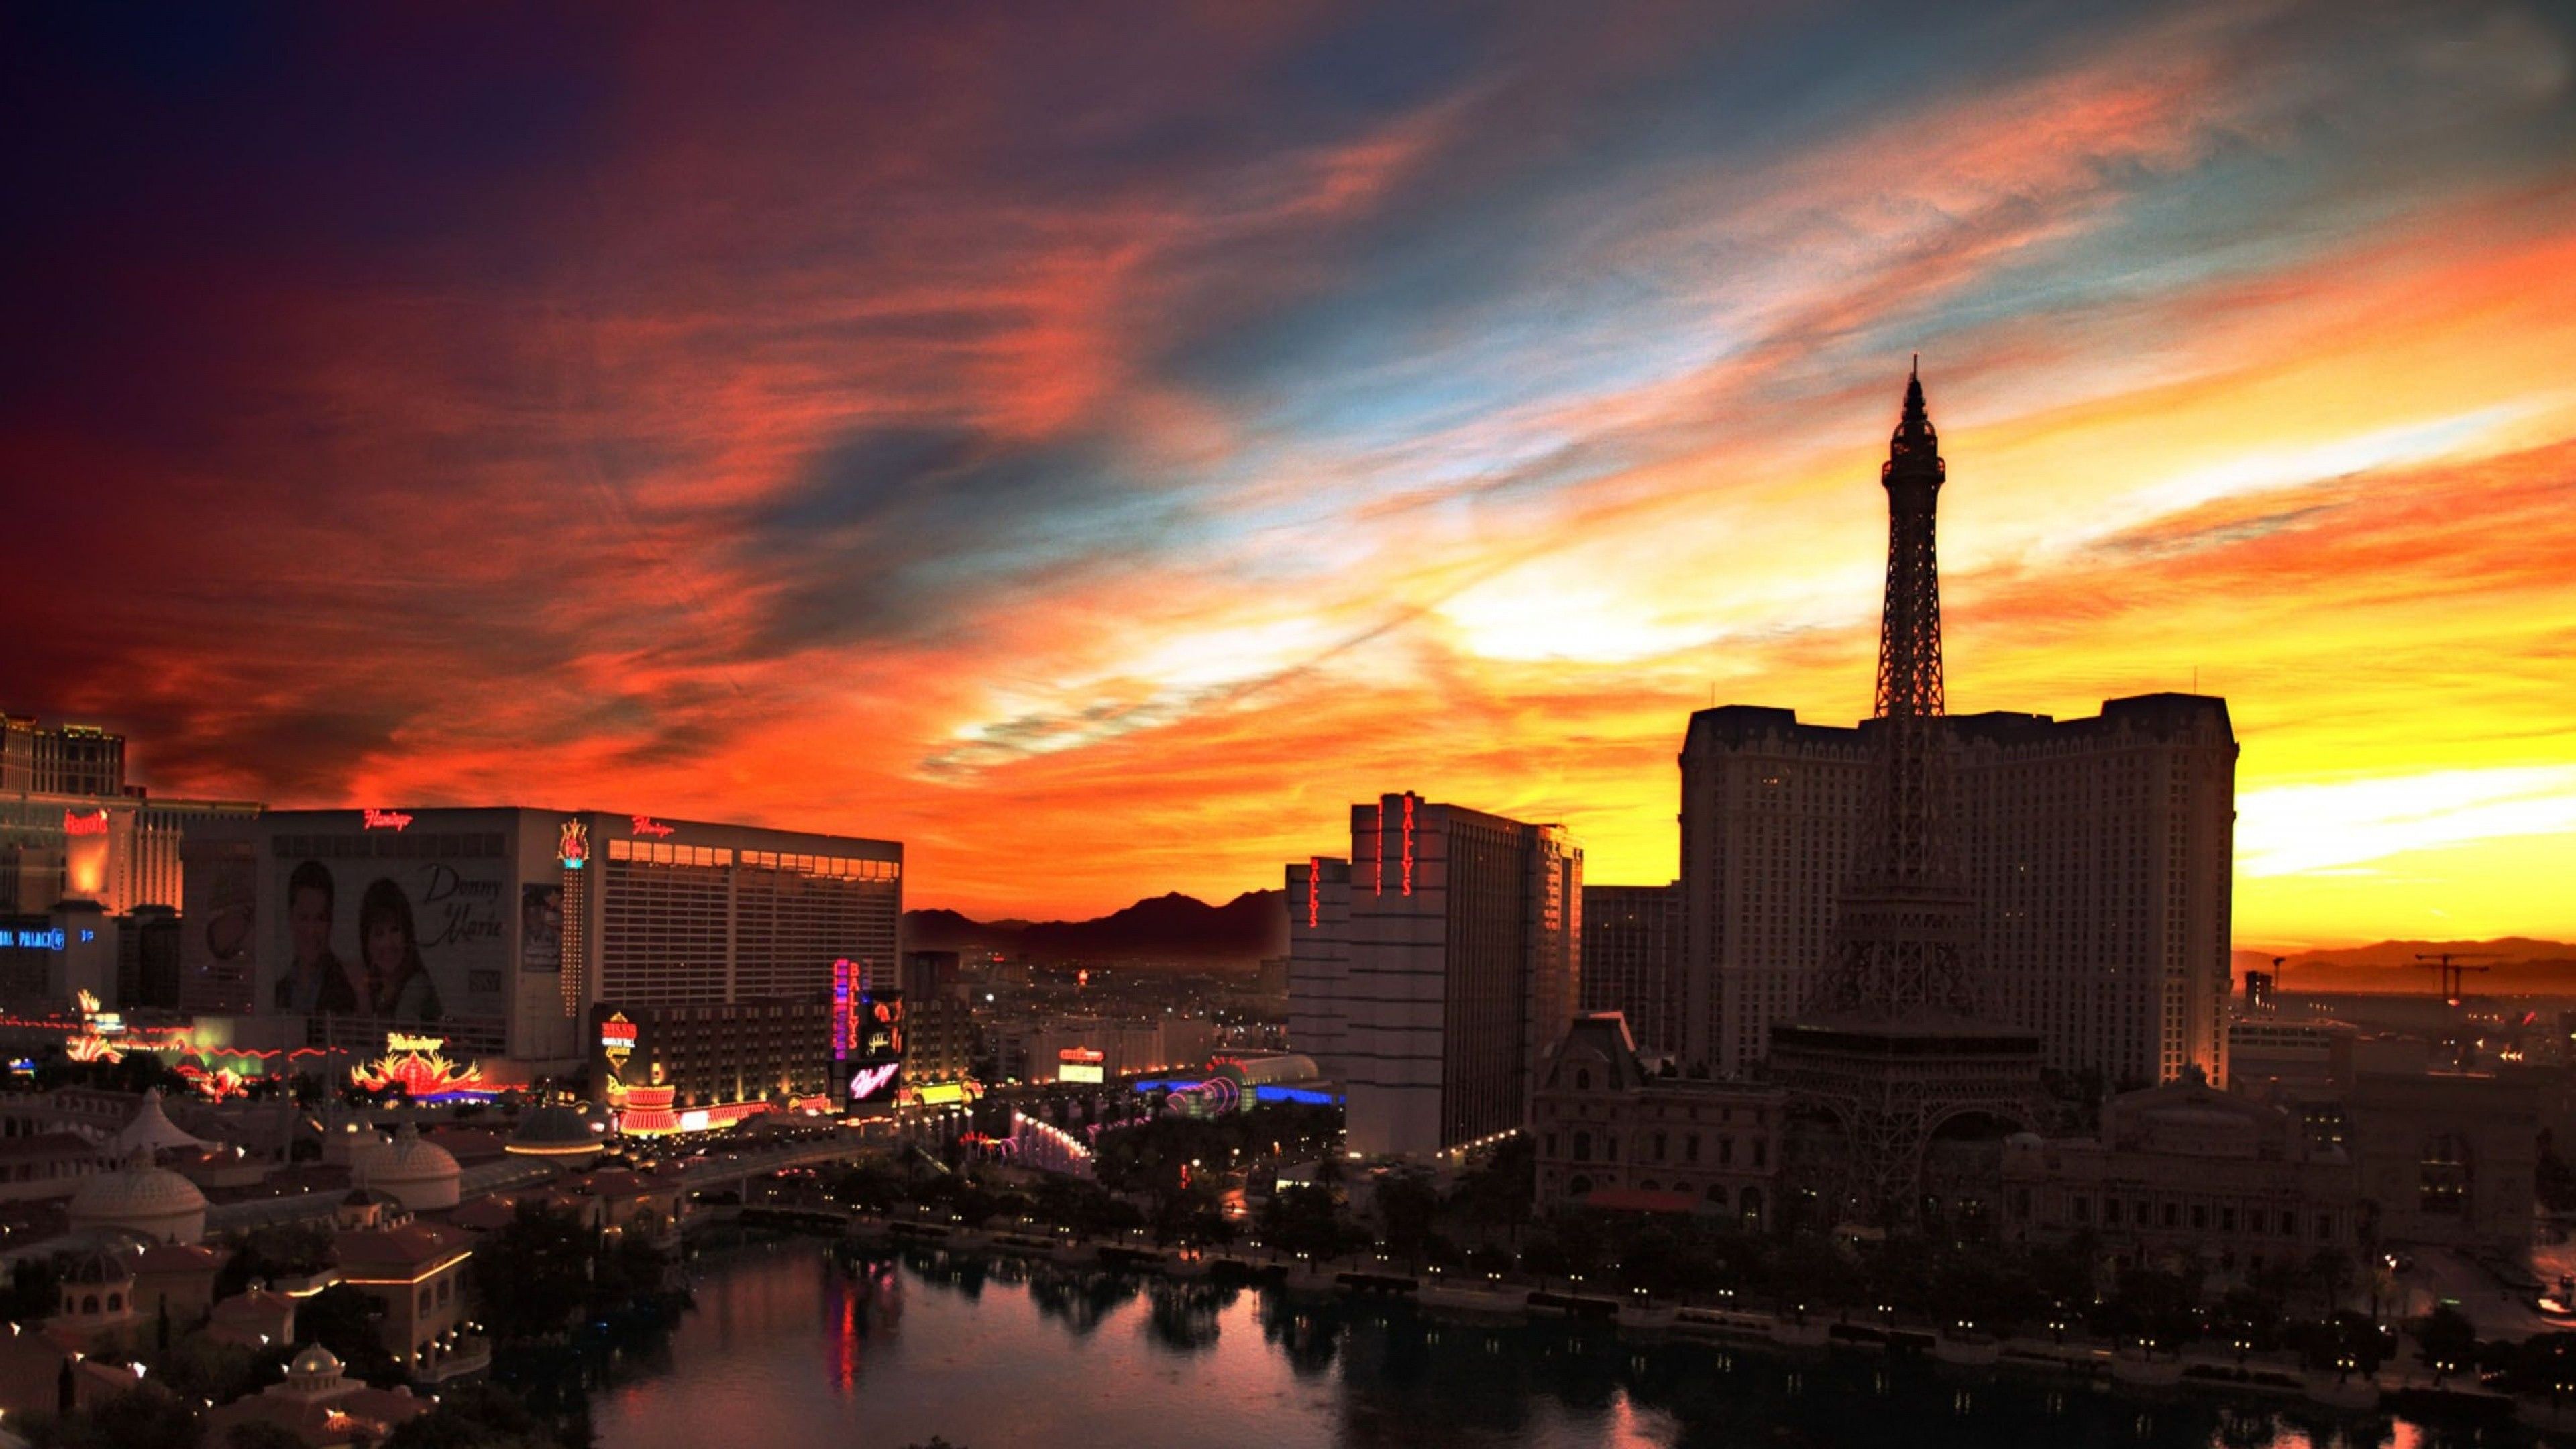 4k Ultra HD Las Vegas Wallpapers Desktop Wallpapers Colourful Backgrounds Photos Download Free Best Windows Picture 3840x2160